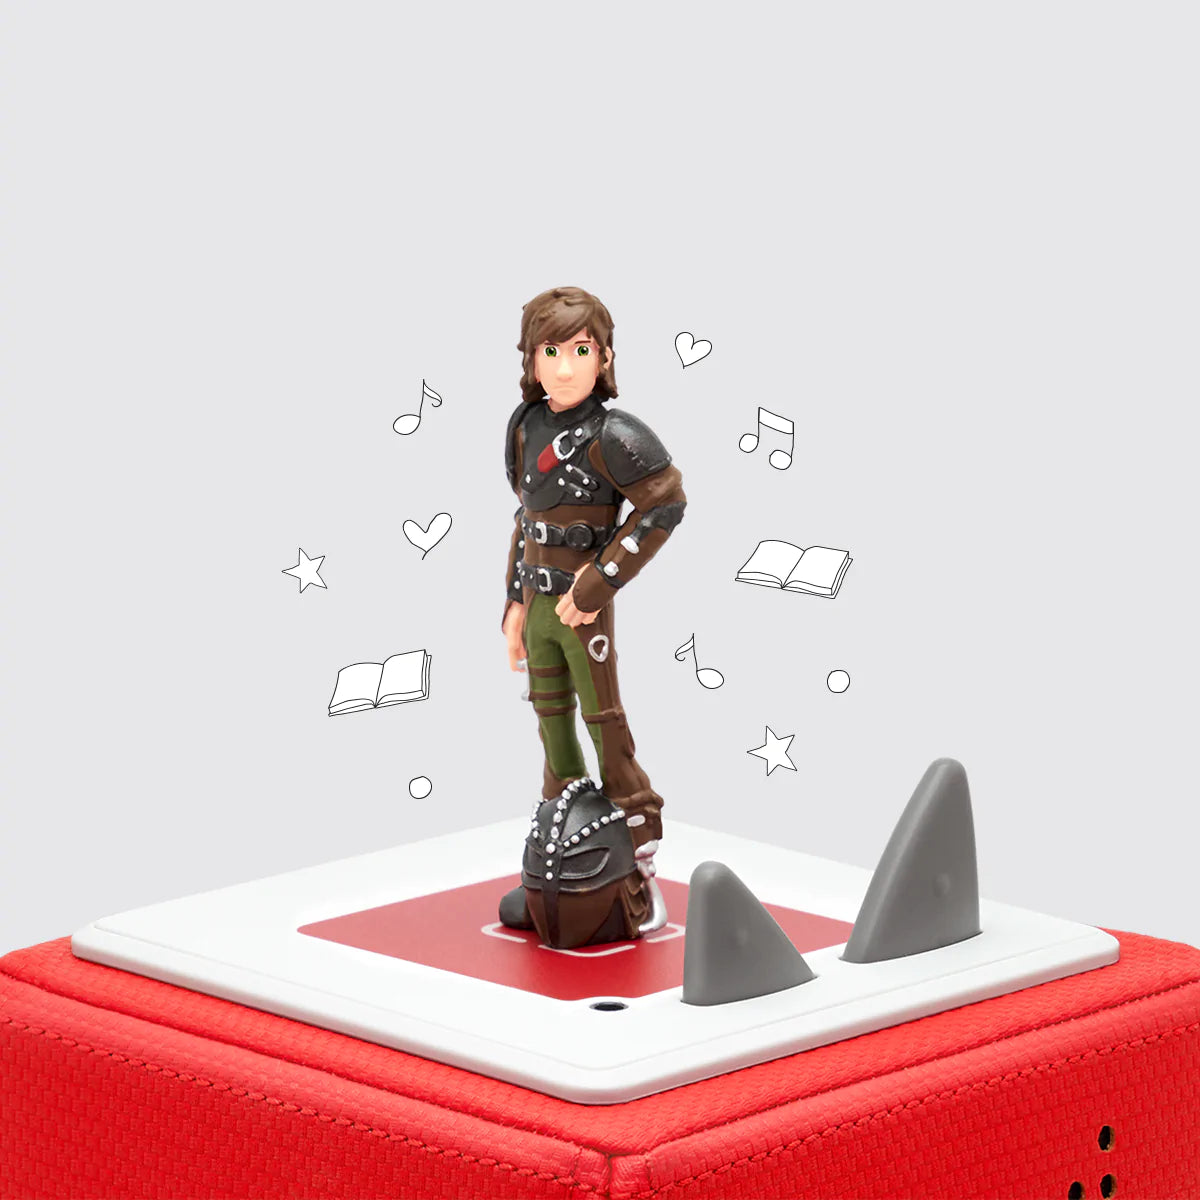 How to Train Your Dragon Tonie Figure